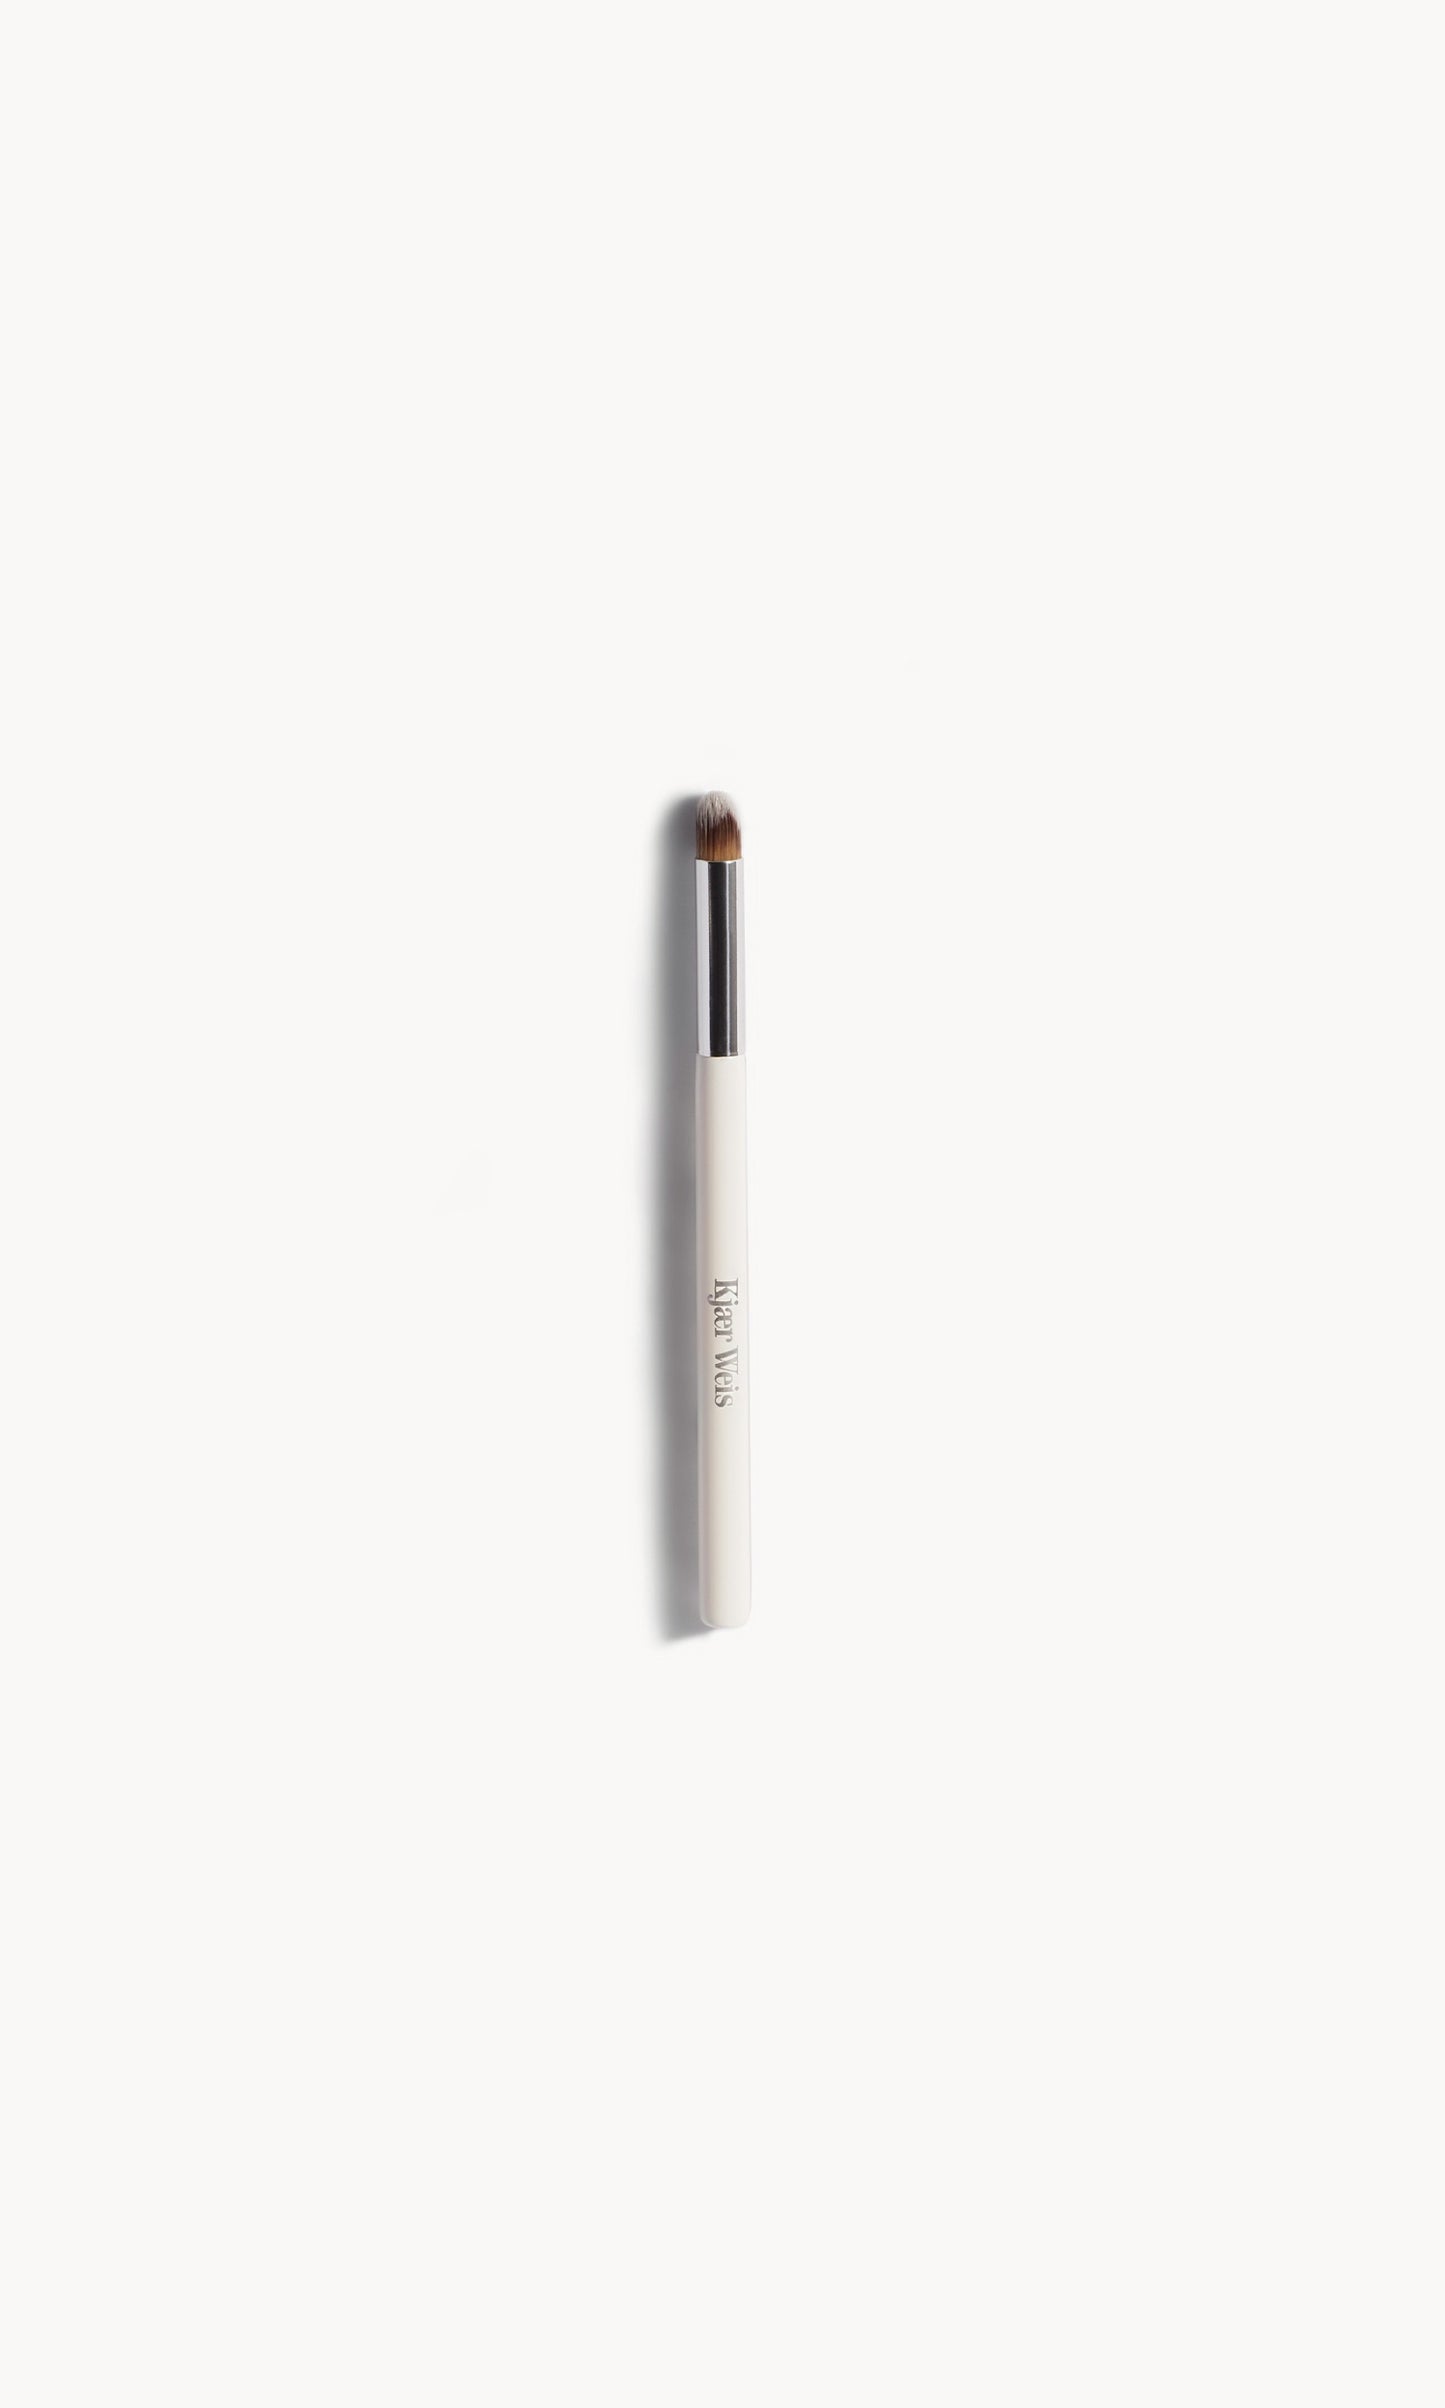 Eye makeup brush with white and silver handle, and short brown bristles on a white background